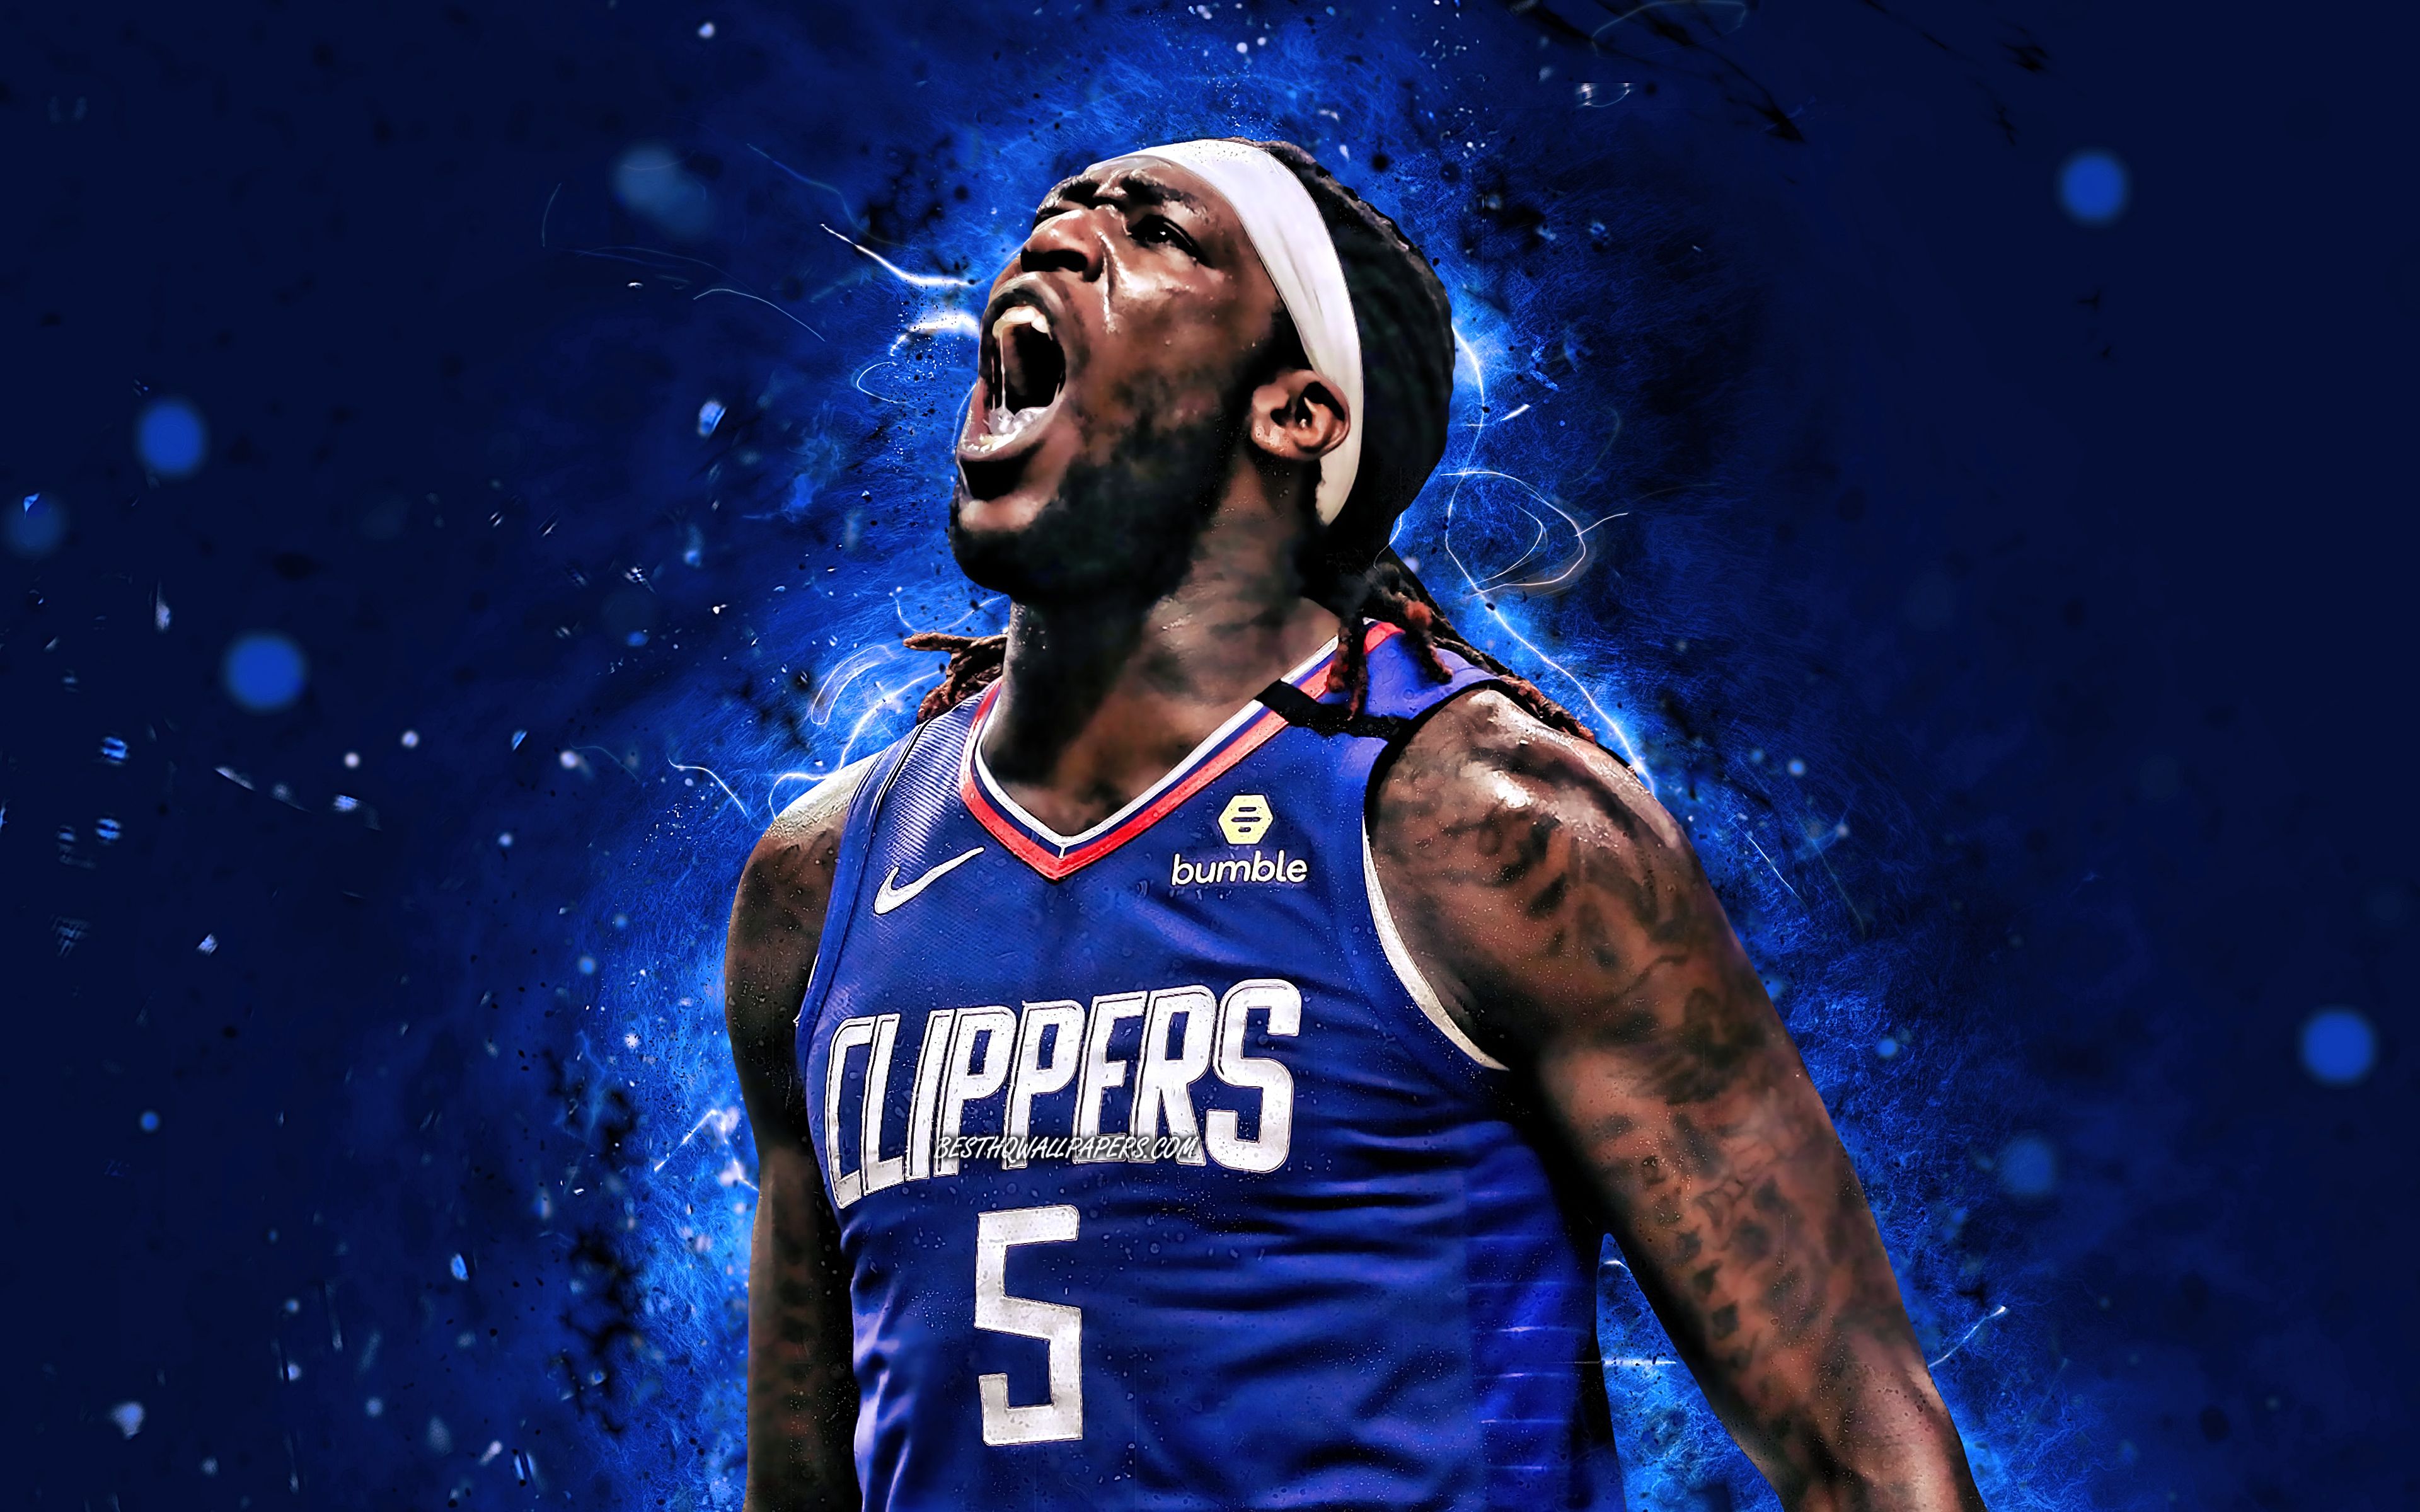 Download wallpaper Montrezl Harrell, 4k, Los Angeles Clippers, NBA, basketball, Montrezl Dashay Harrell, blue neon lights, USA, Montrezl Harrell Los Angeles Clippers, creative, Montrezl Harrell 4K, LA Clippers for desktop with